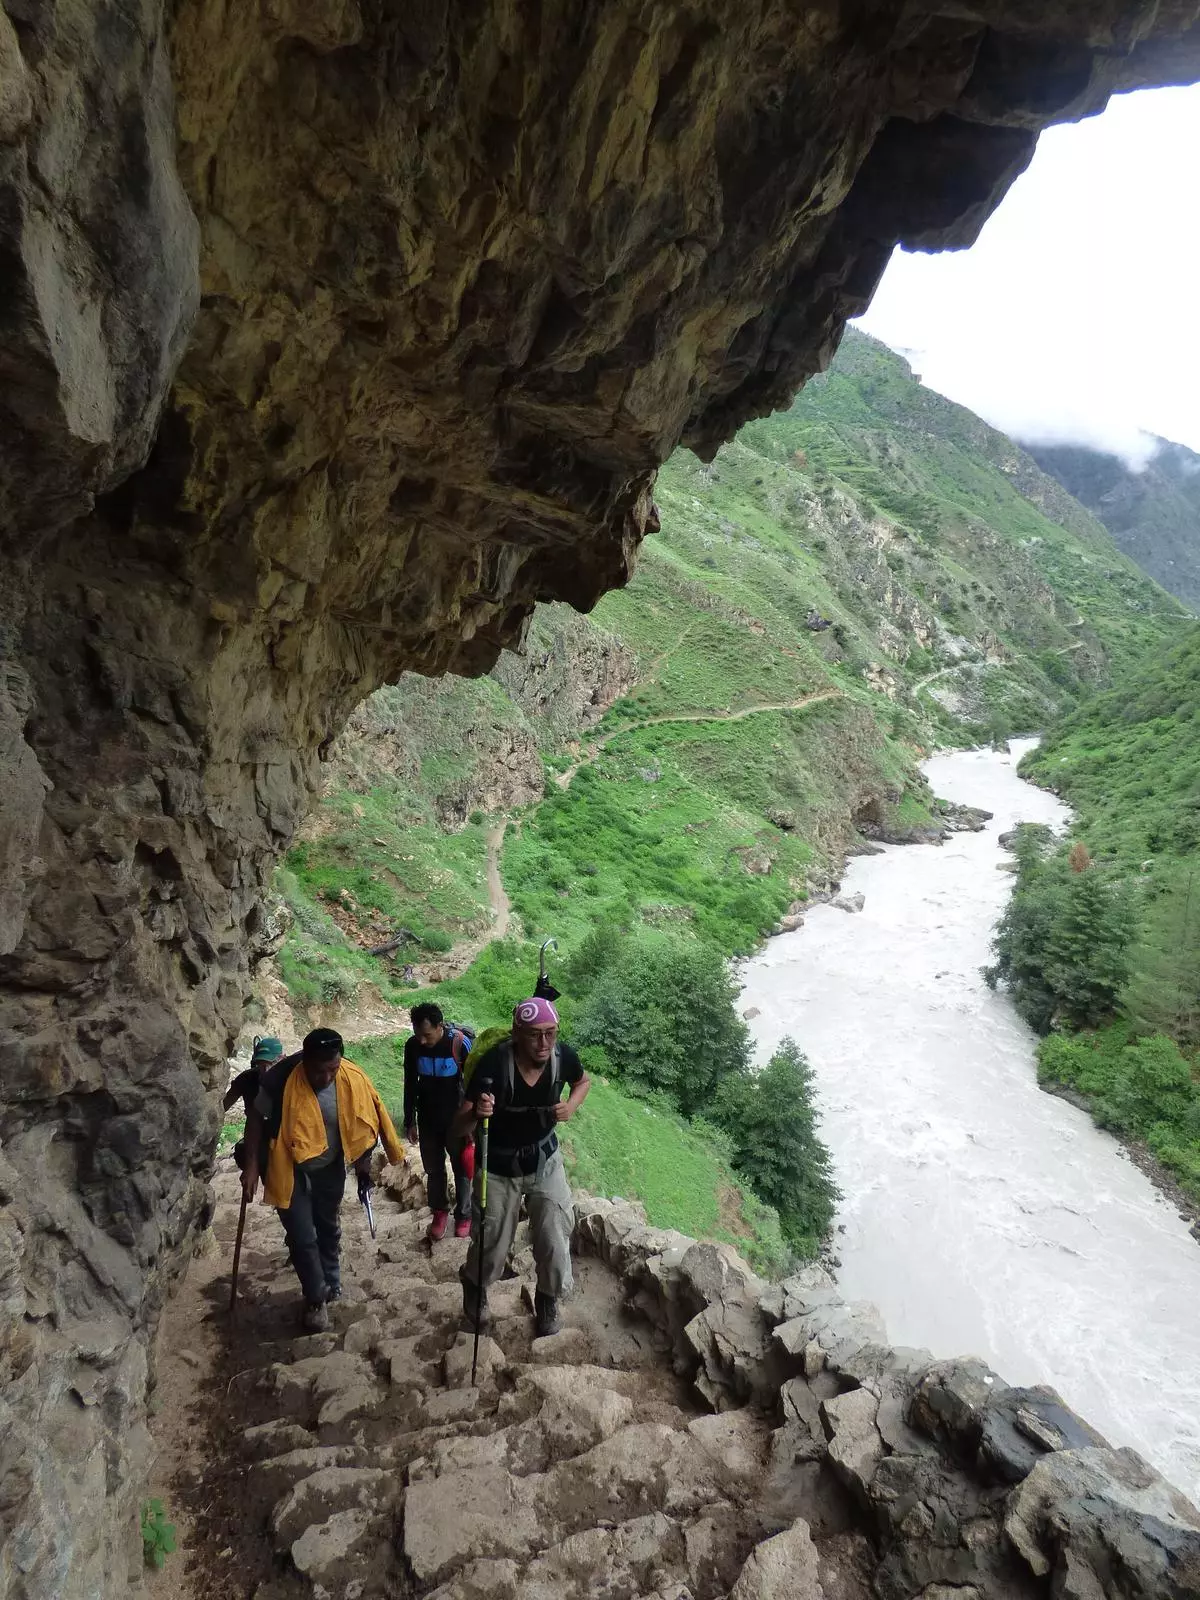 Our team hiking up the old trail along the Humla Karnali river. Humla district in west Nepal is one of the highest and most remote regions of the country.